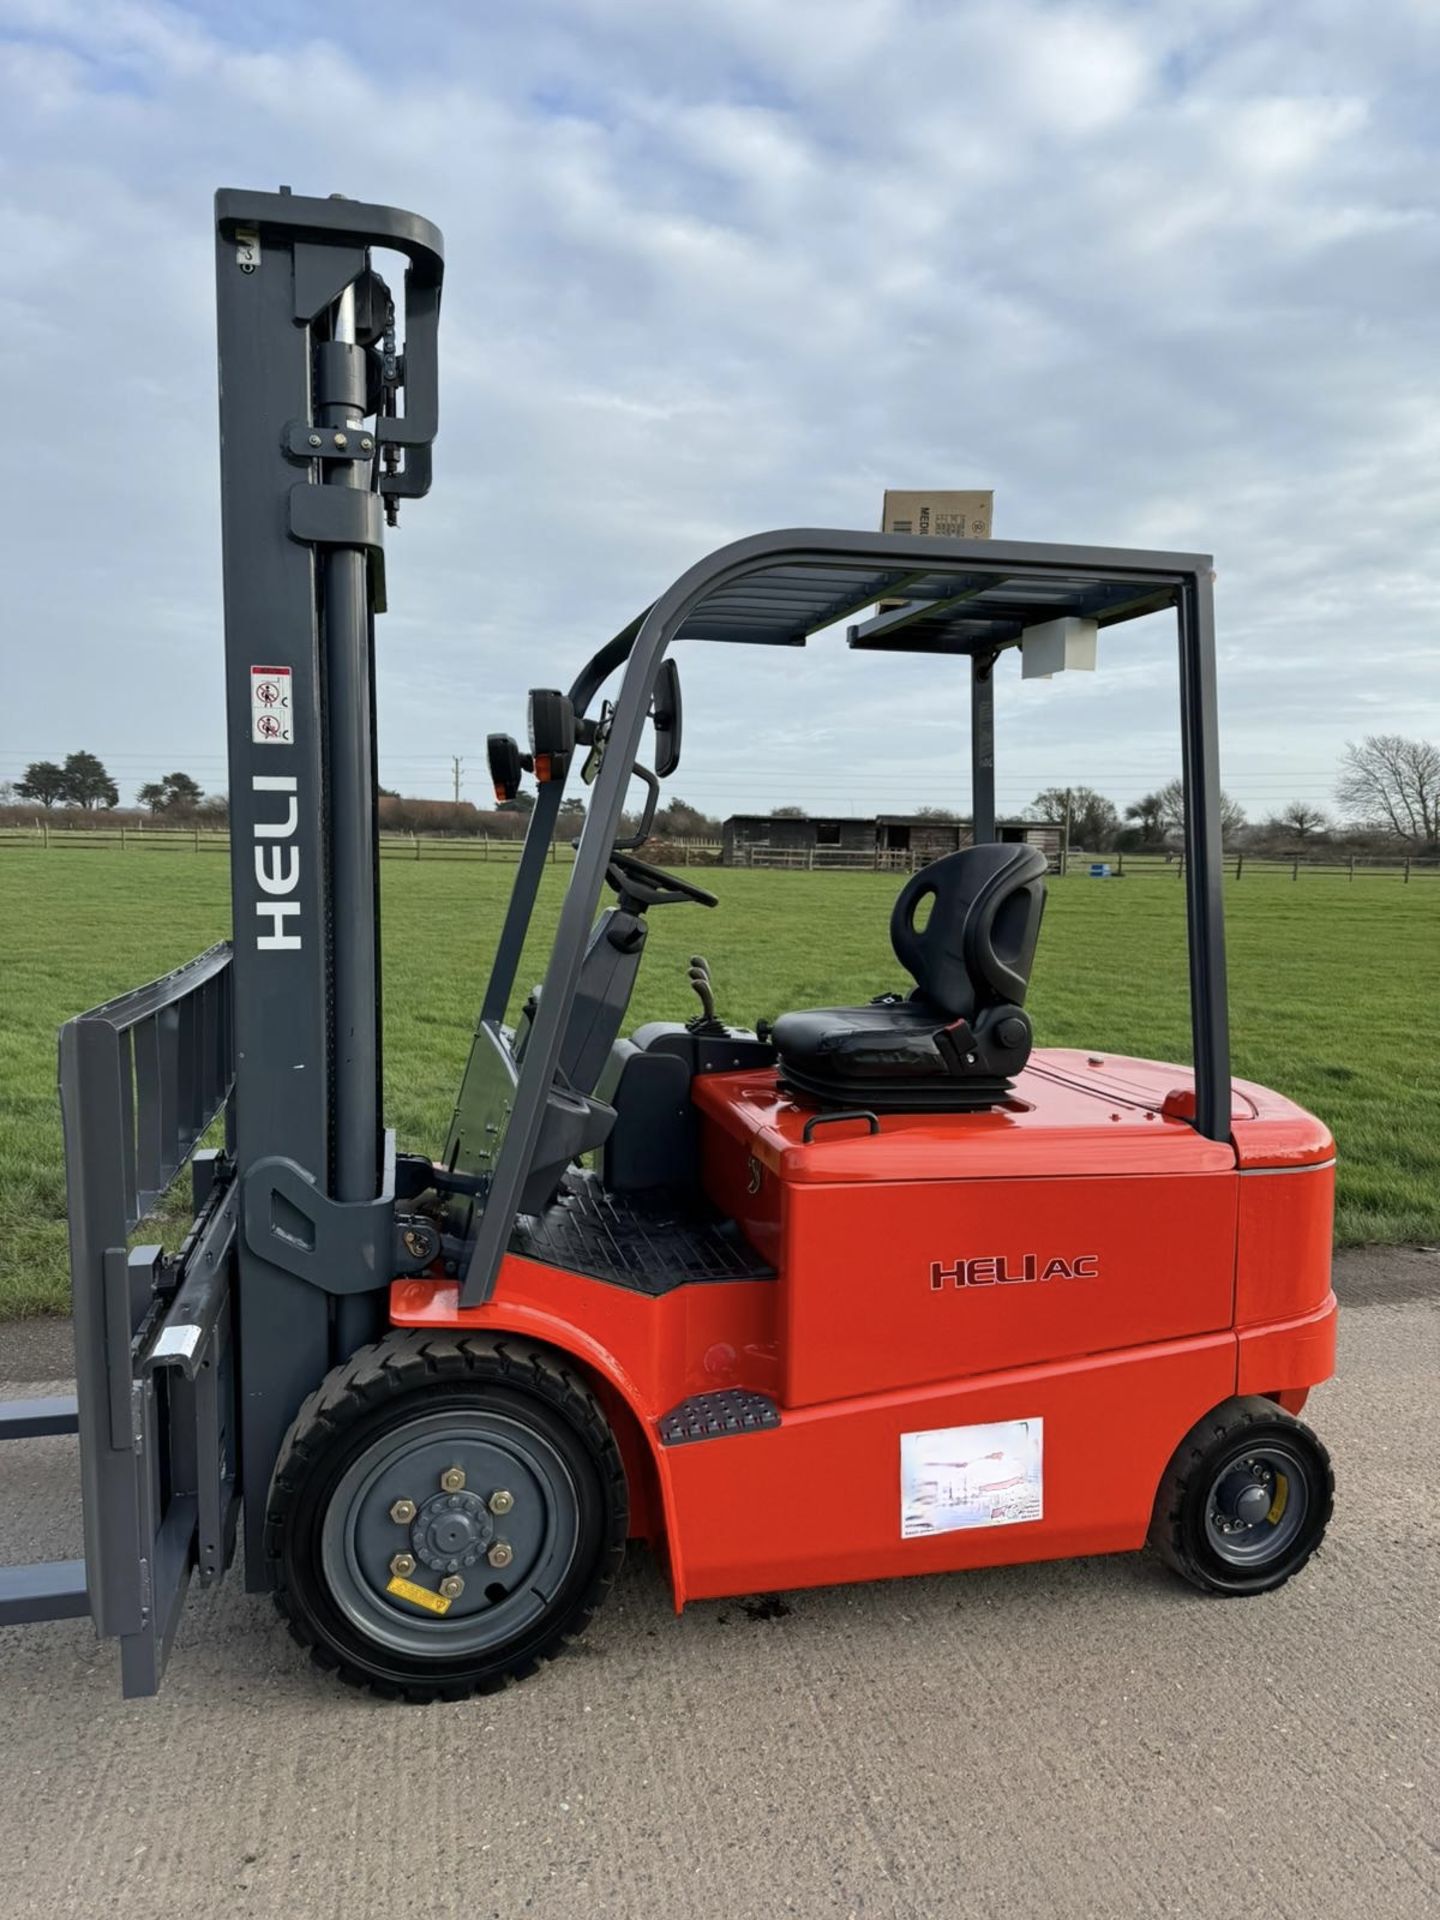 2013, HELI - 3.5 Tonne, Electric Forklift Truck - Image 8 of 8